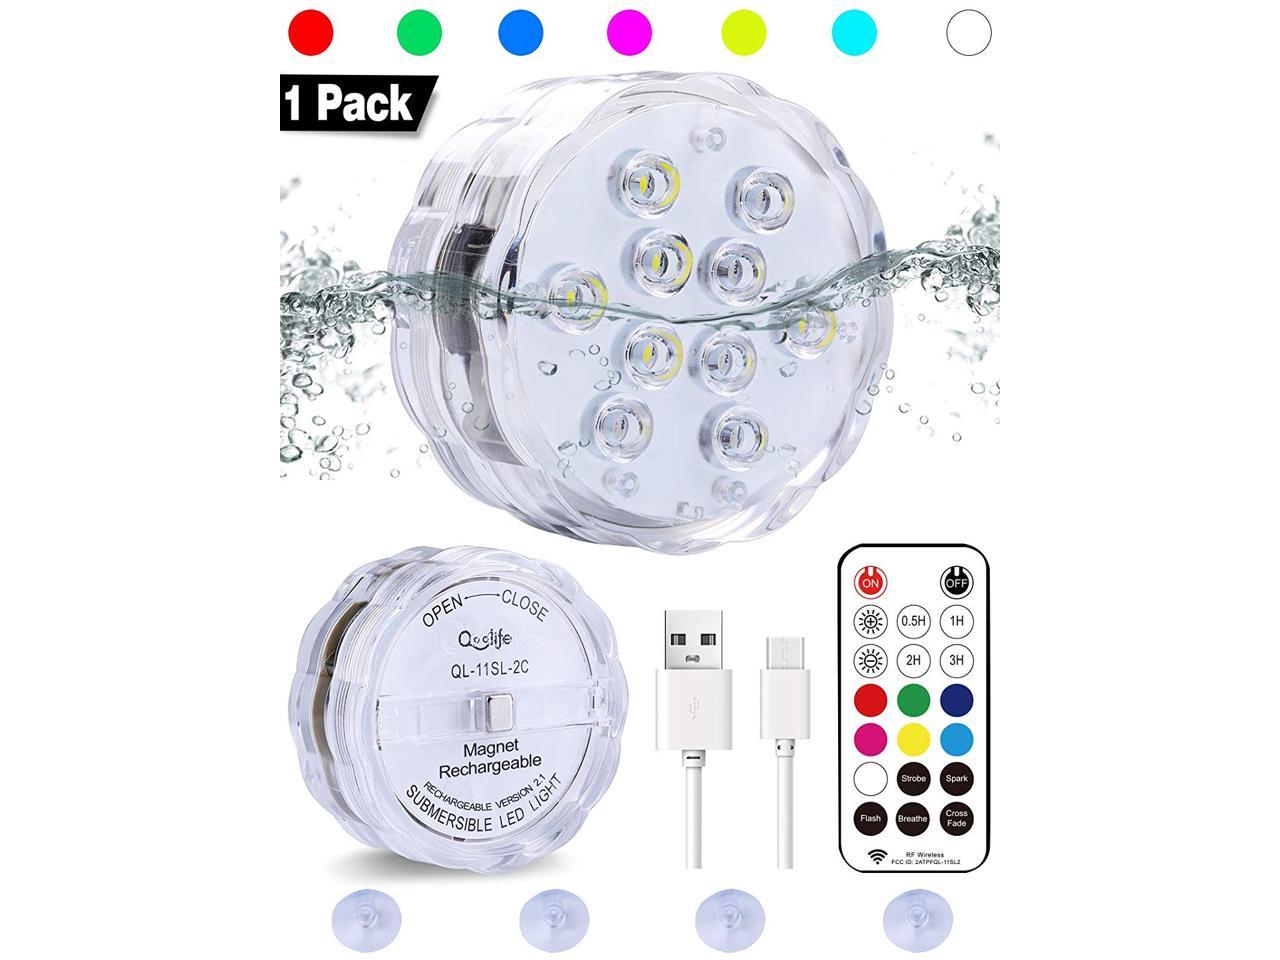 ANGTUO Hot Tub Lights Garden Color Changing Underwater Light for Vase Base Pond 10 Pcs LED Submersible Lights with Remote Control Powered 2 X CR2450 Batteries Fish Tank Included Pool Hot Tub 